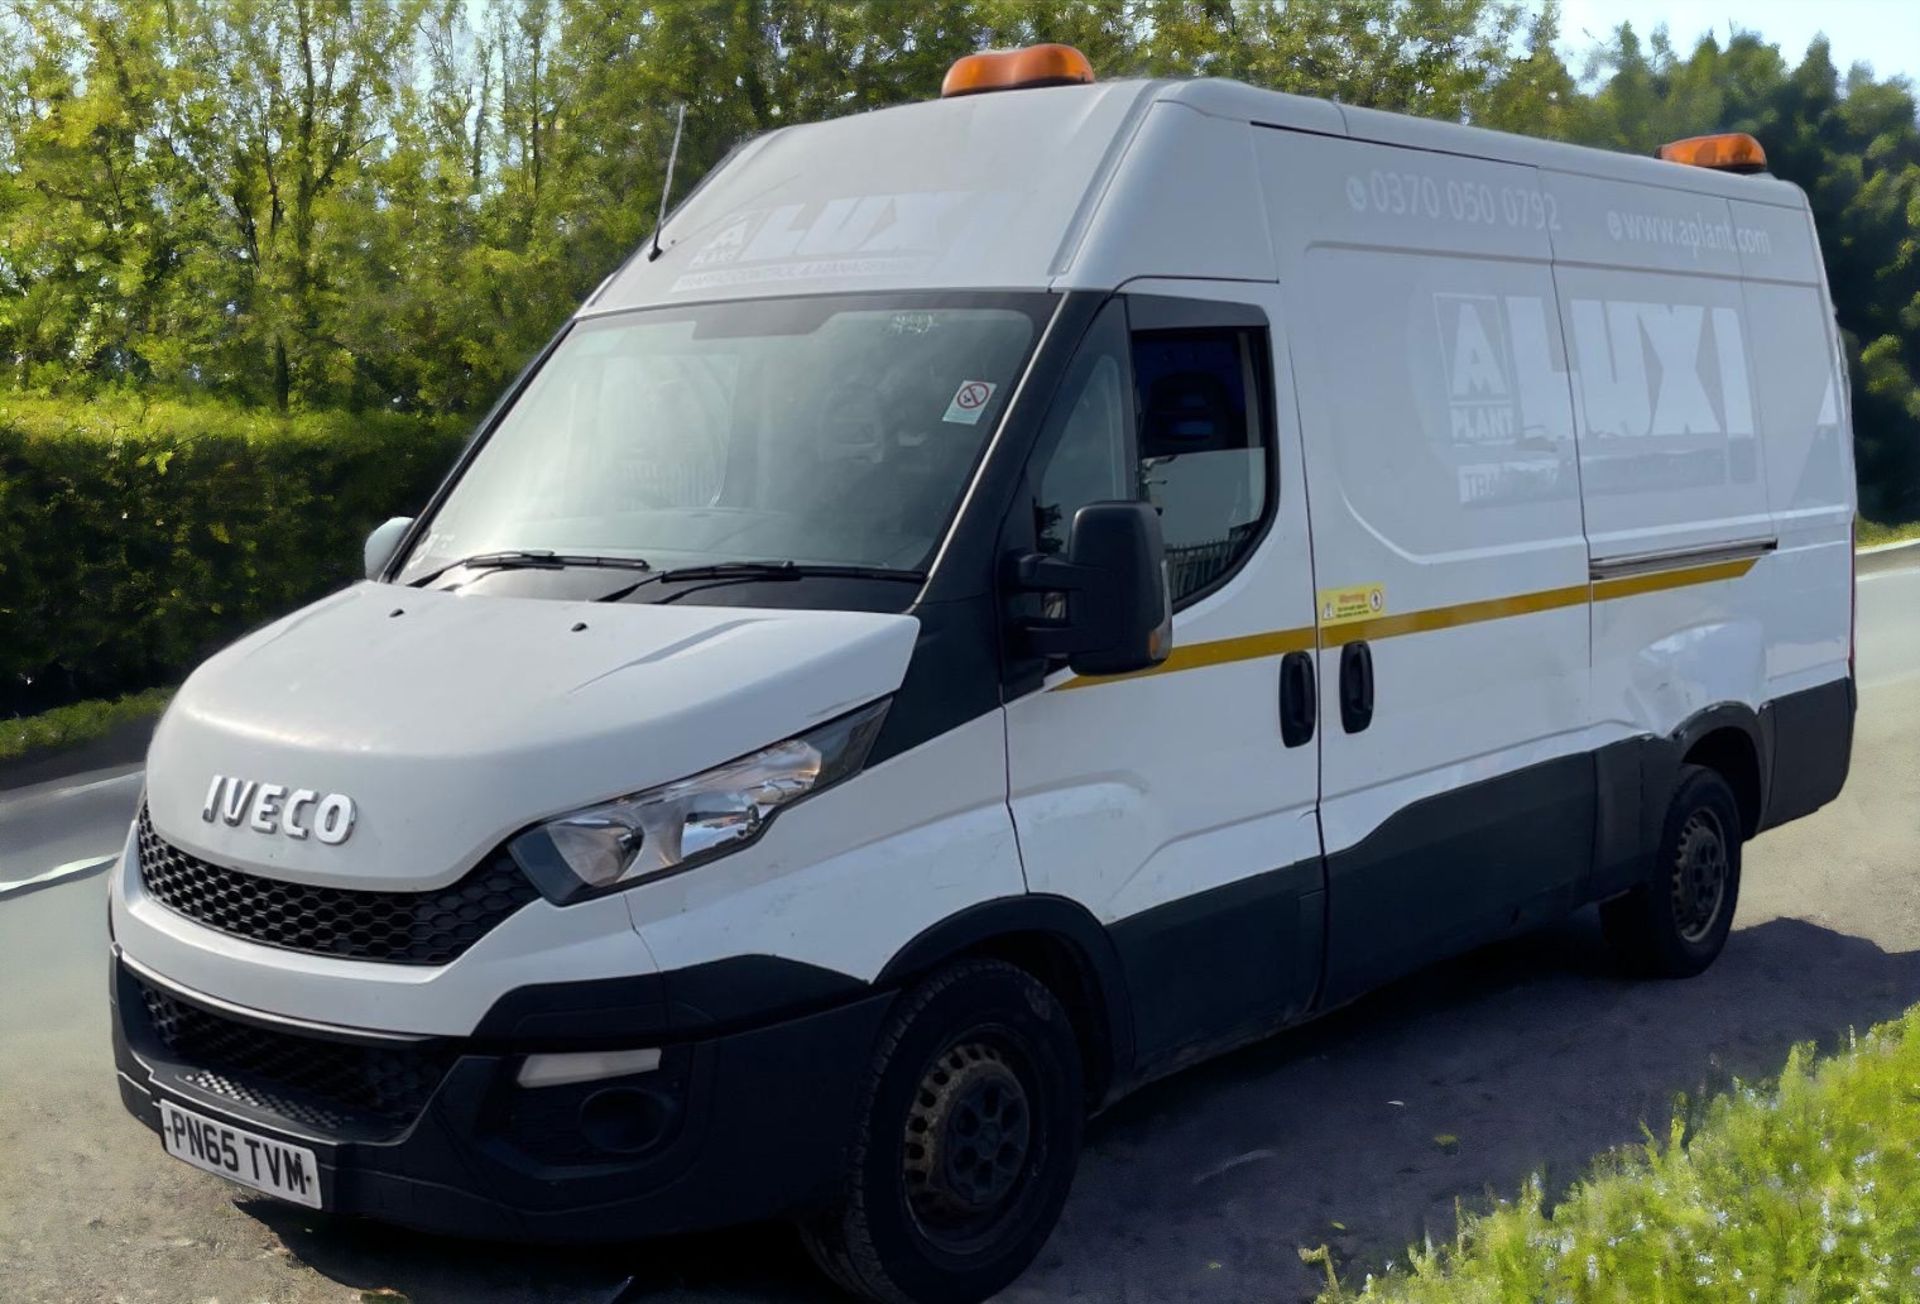 2015-65 REG IVECO DAILY 35S11 MWB L2H1 - HPI CLEAR - READY TO GO! - Image 2 of 12